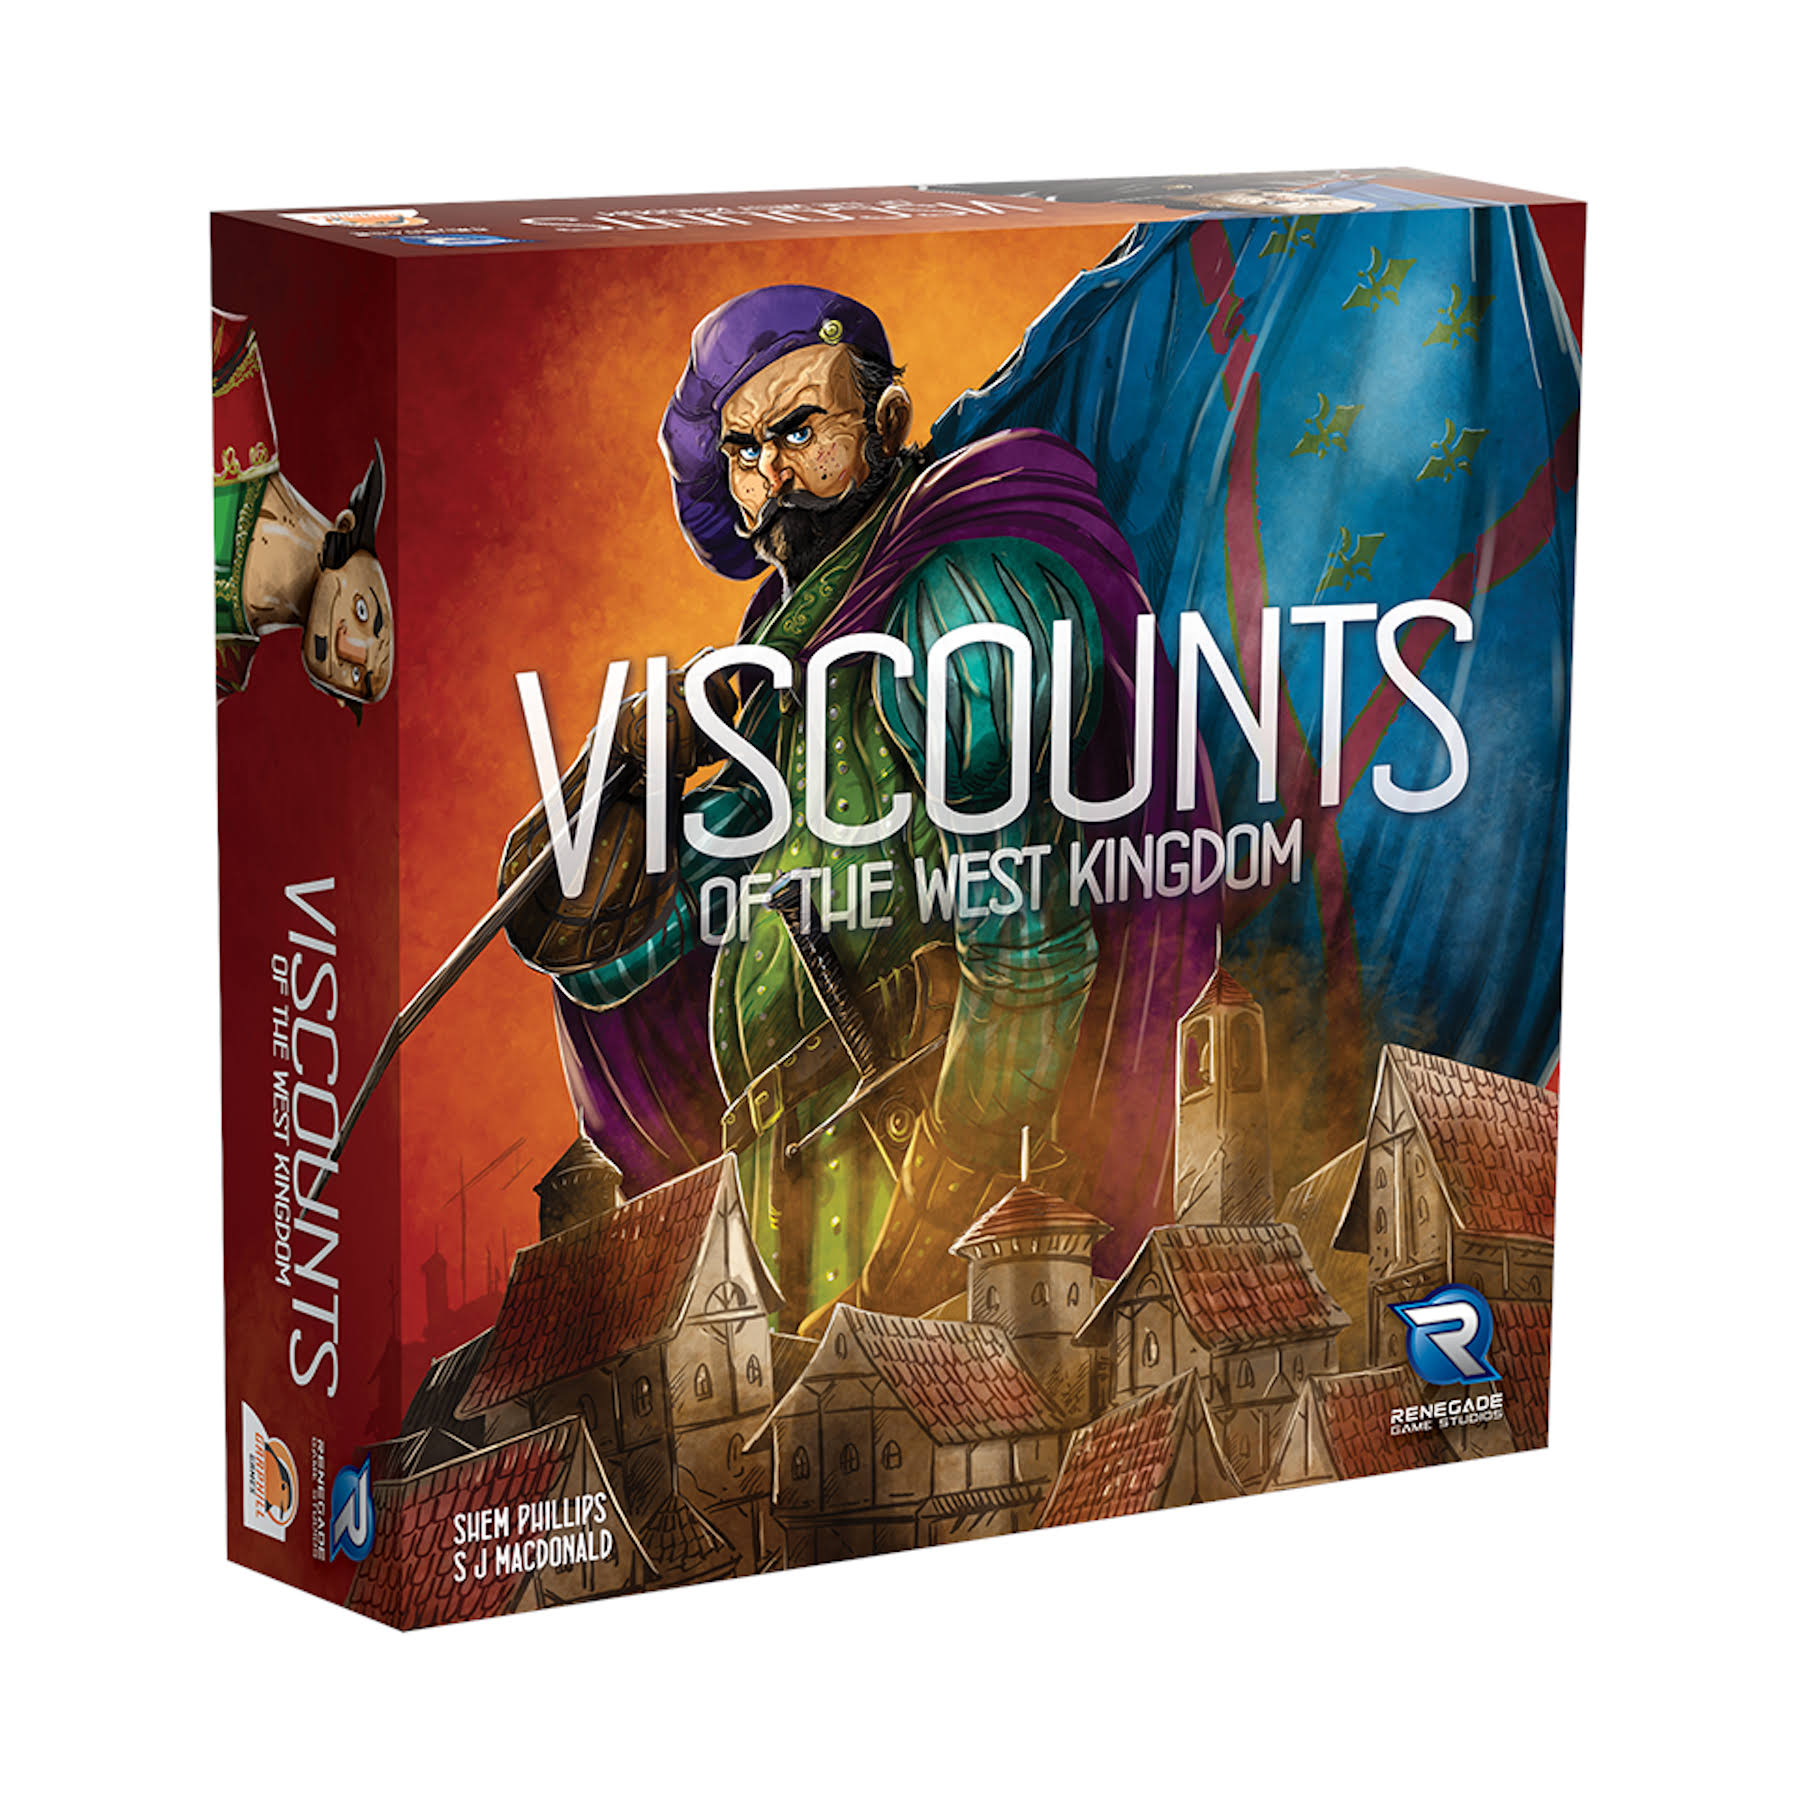 Viscounts of The West Kingdom Board Game